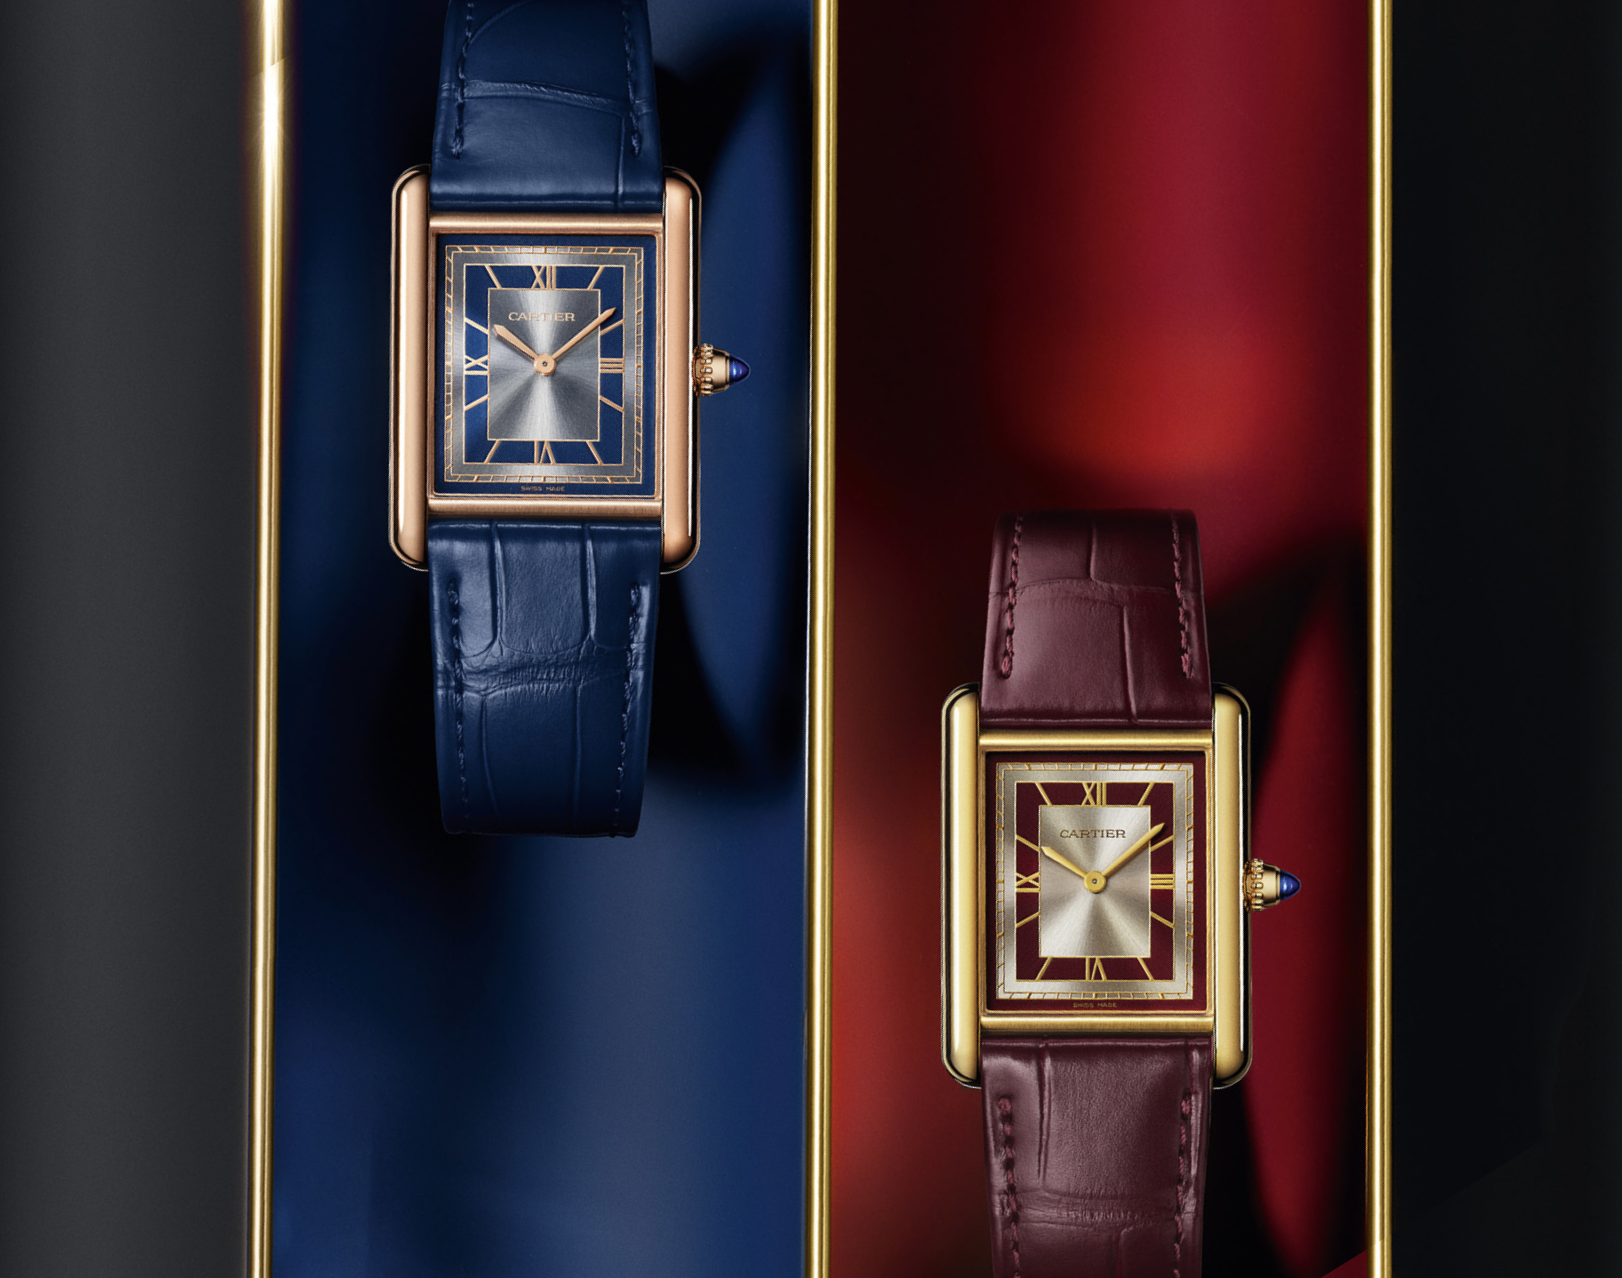 INTRODUCING The Tank Louis Cartier collection is a revival of Art Deco